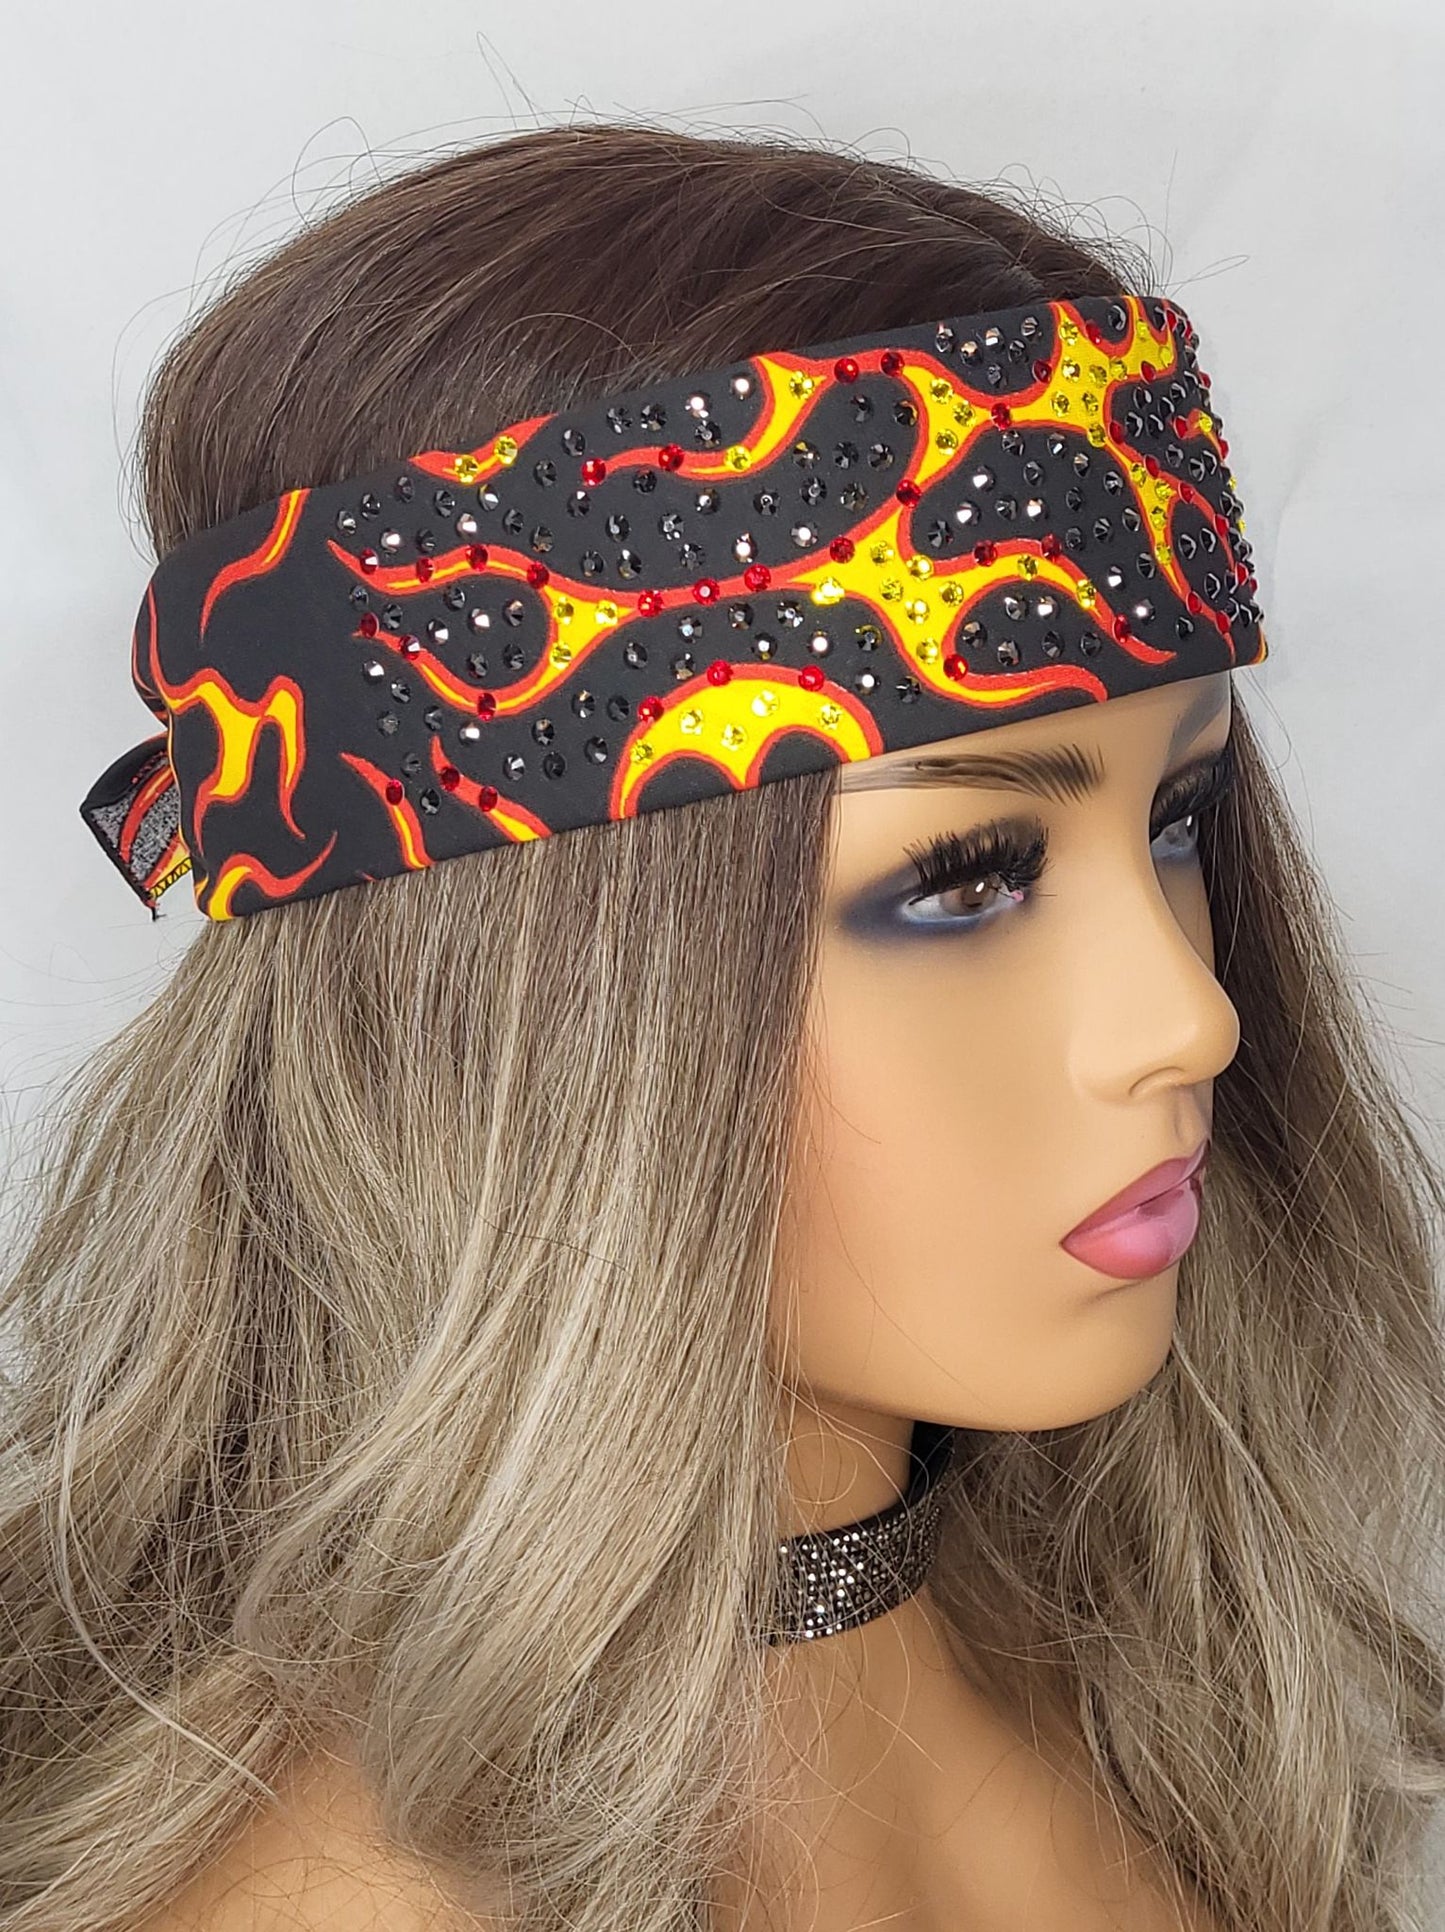 LeeAnnette Narrow Flames with Black, Red and Yellow Austrian Crystals (4992)